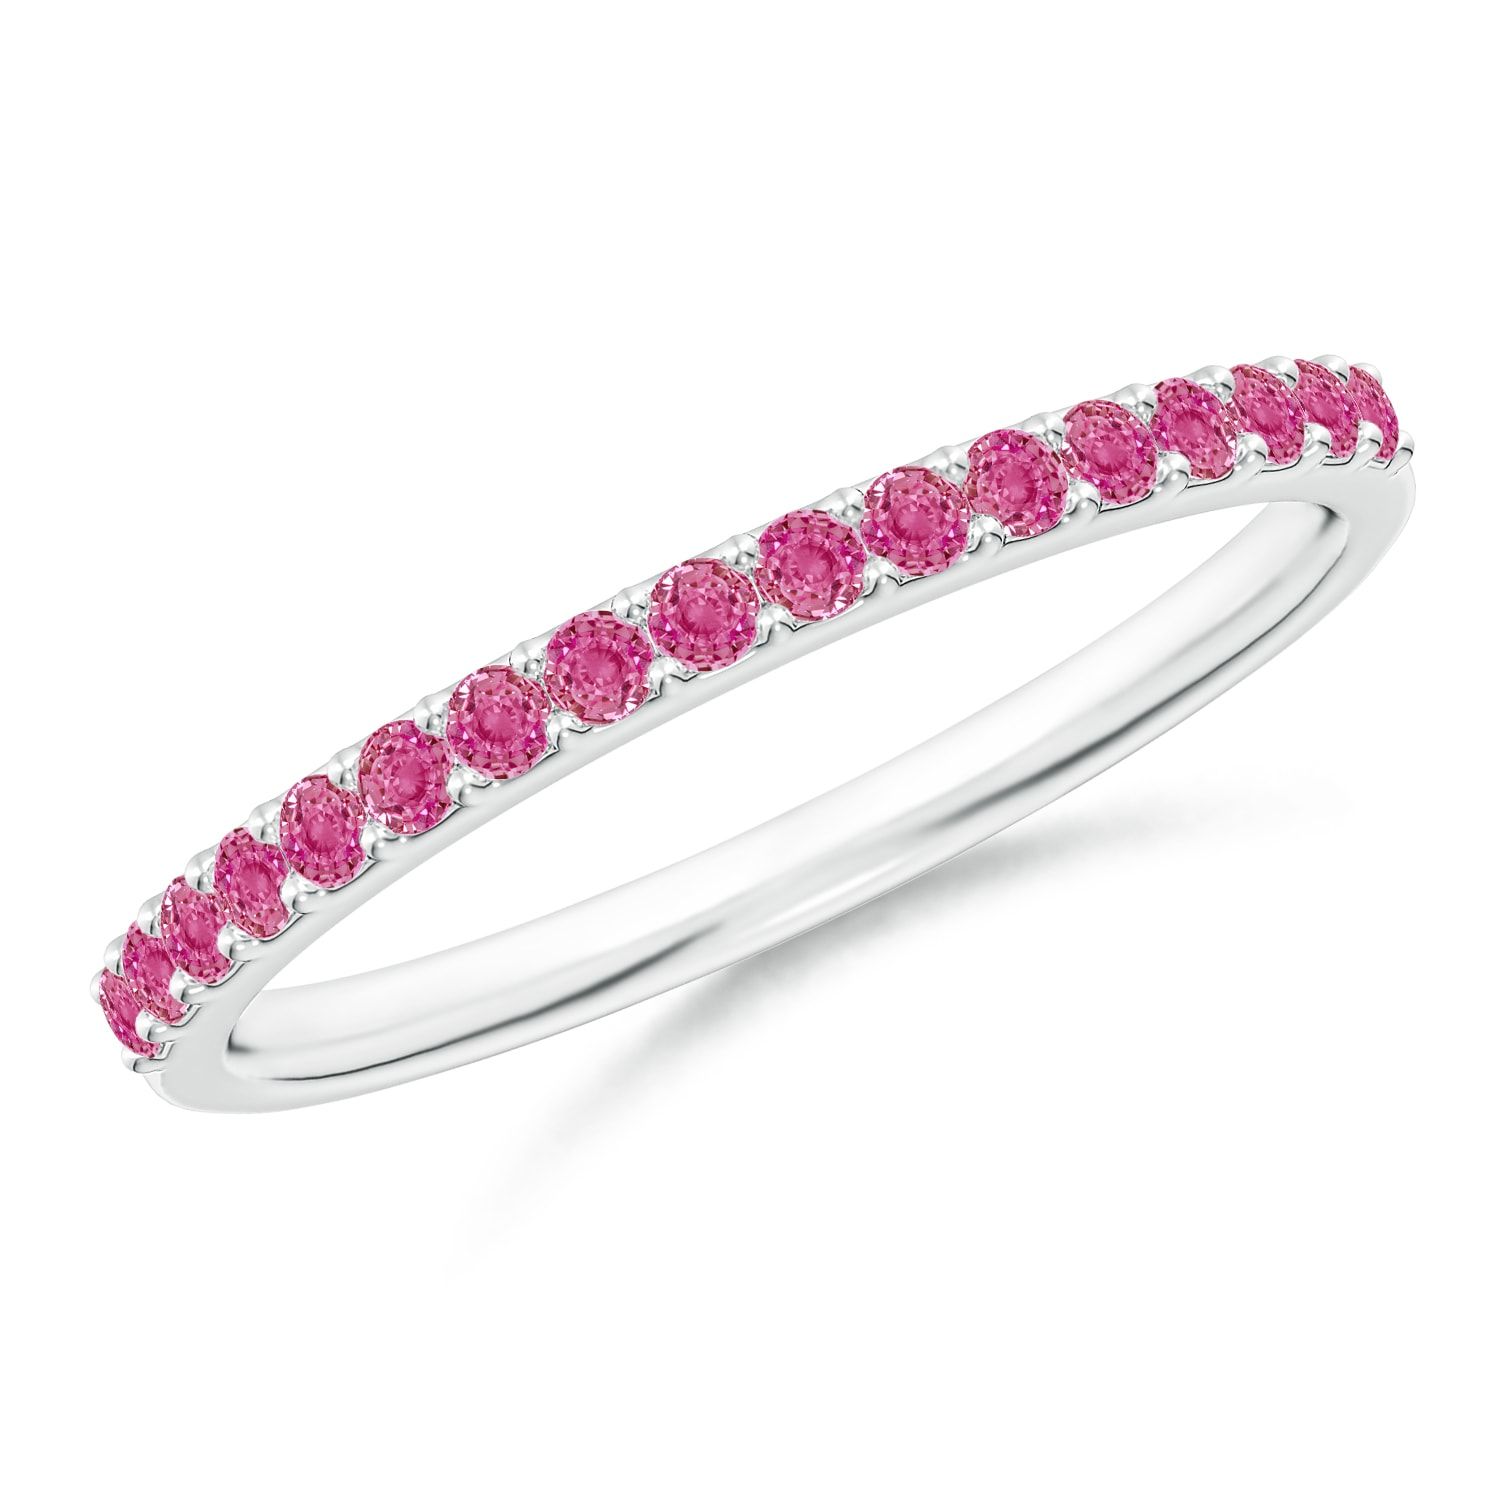 Prong Set Half Eternity Round Pink Sapphire Wedding Band With 2017 Prong Set Round Brilliant Sapphire And Diamond Wedding Bands (View 10 of 25)